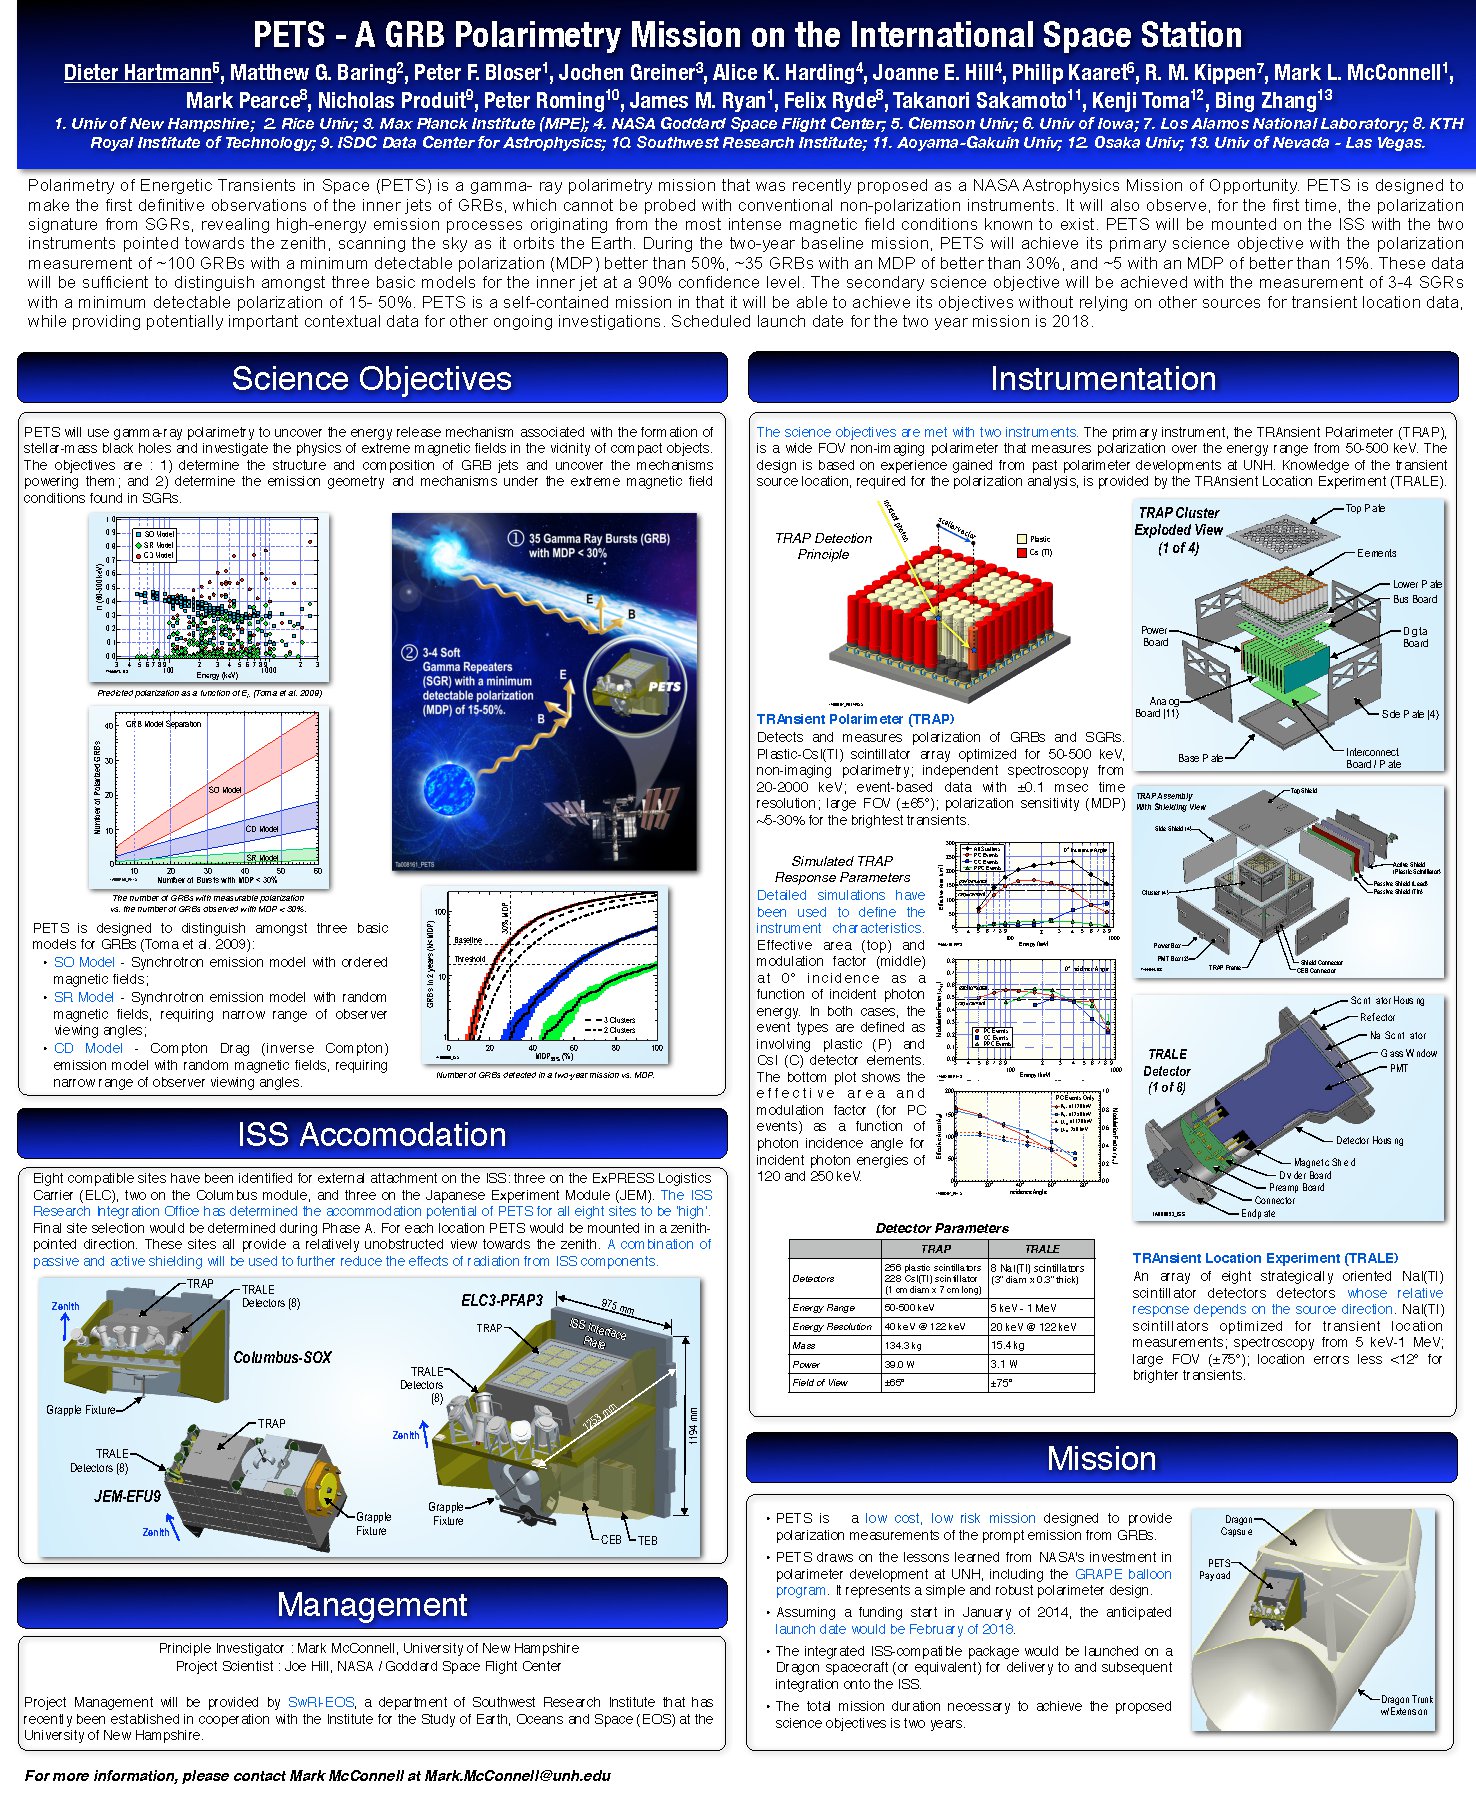 Pets-A Grb Polarimetry Mission by jslegere